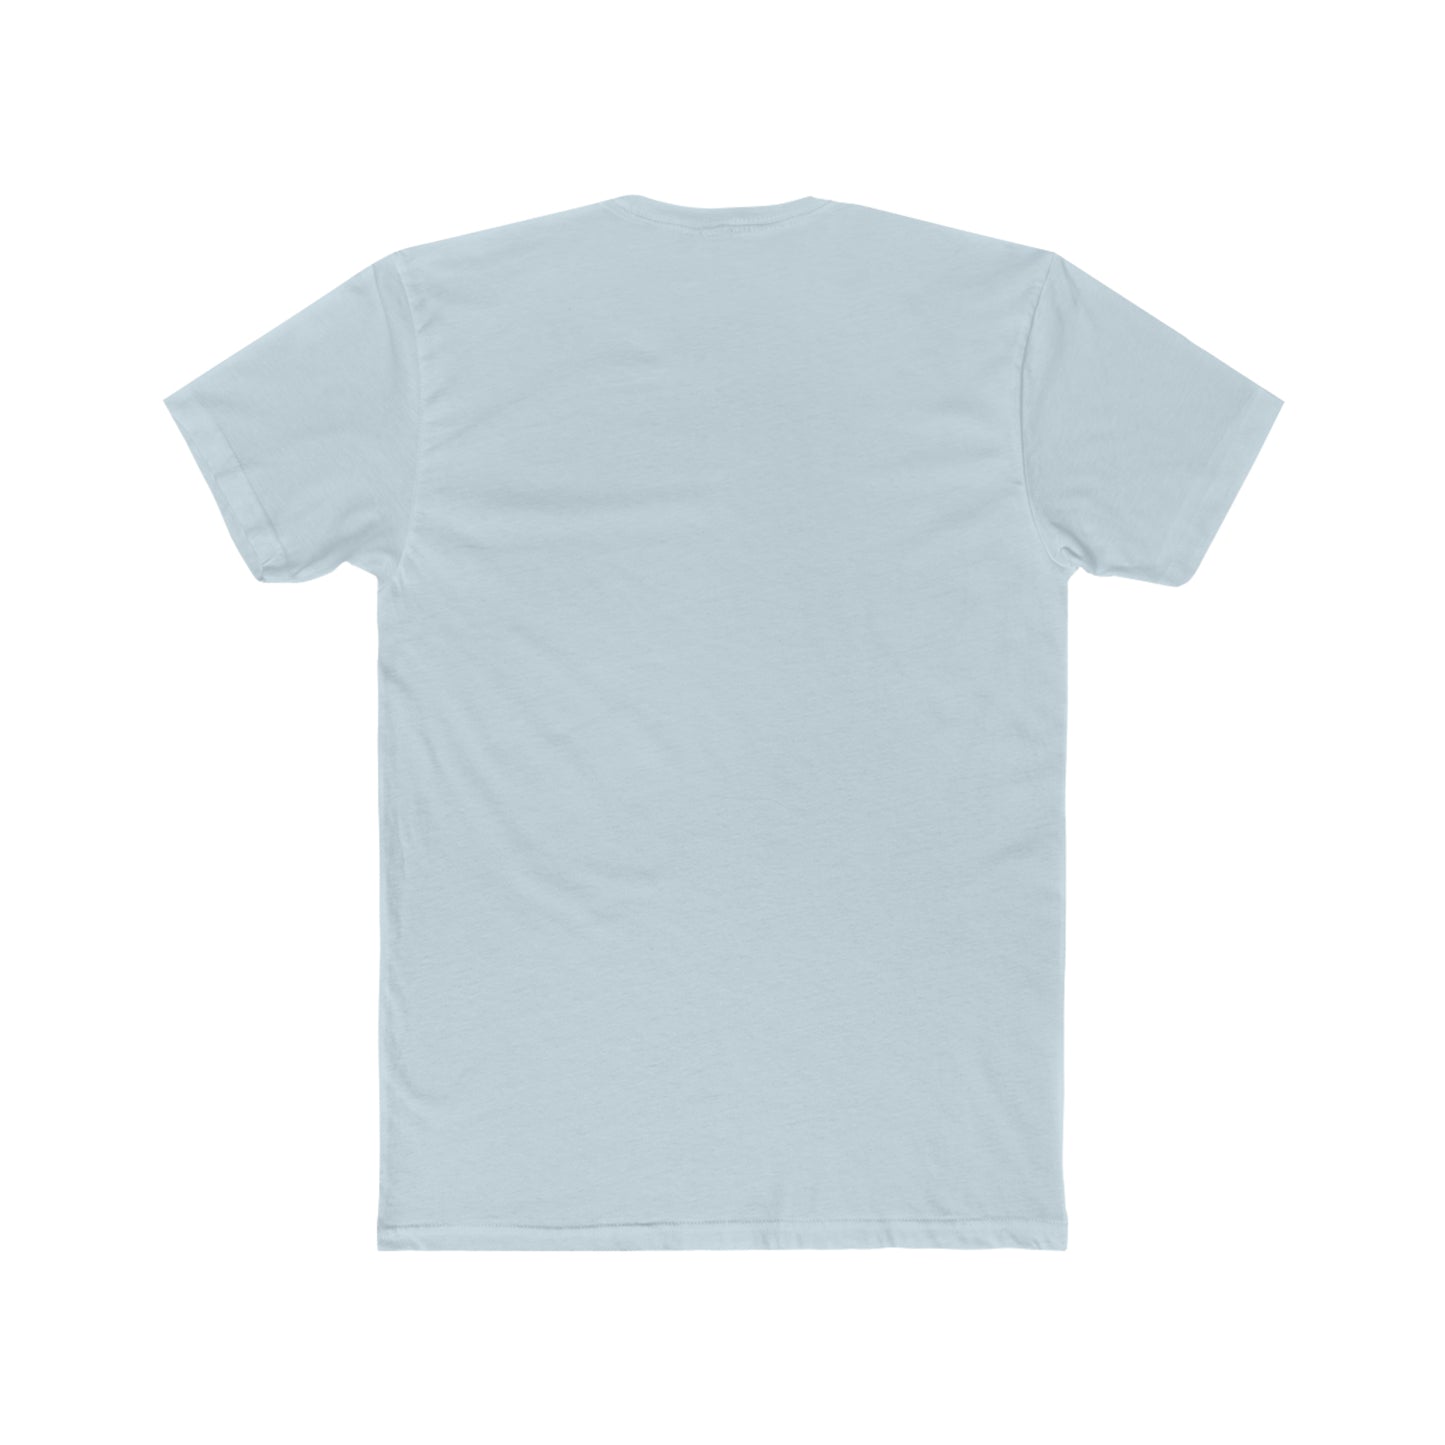 Men's Cotton Crew Tee -- Only 500 will be sold